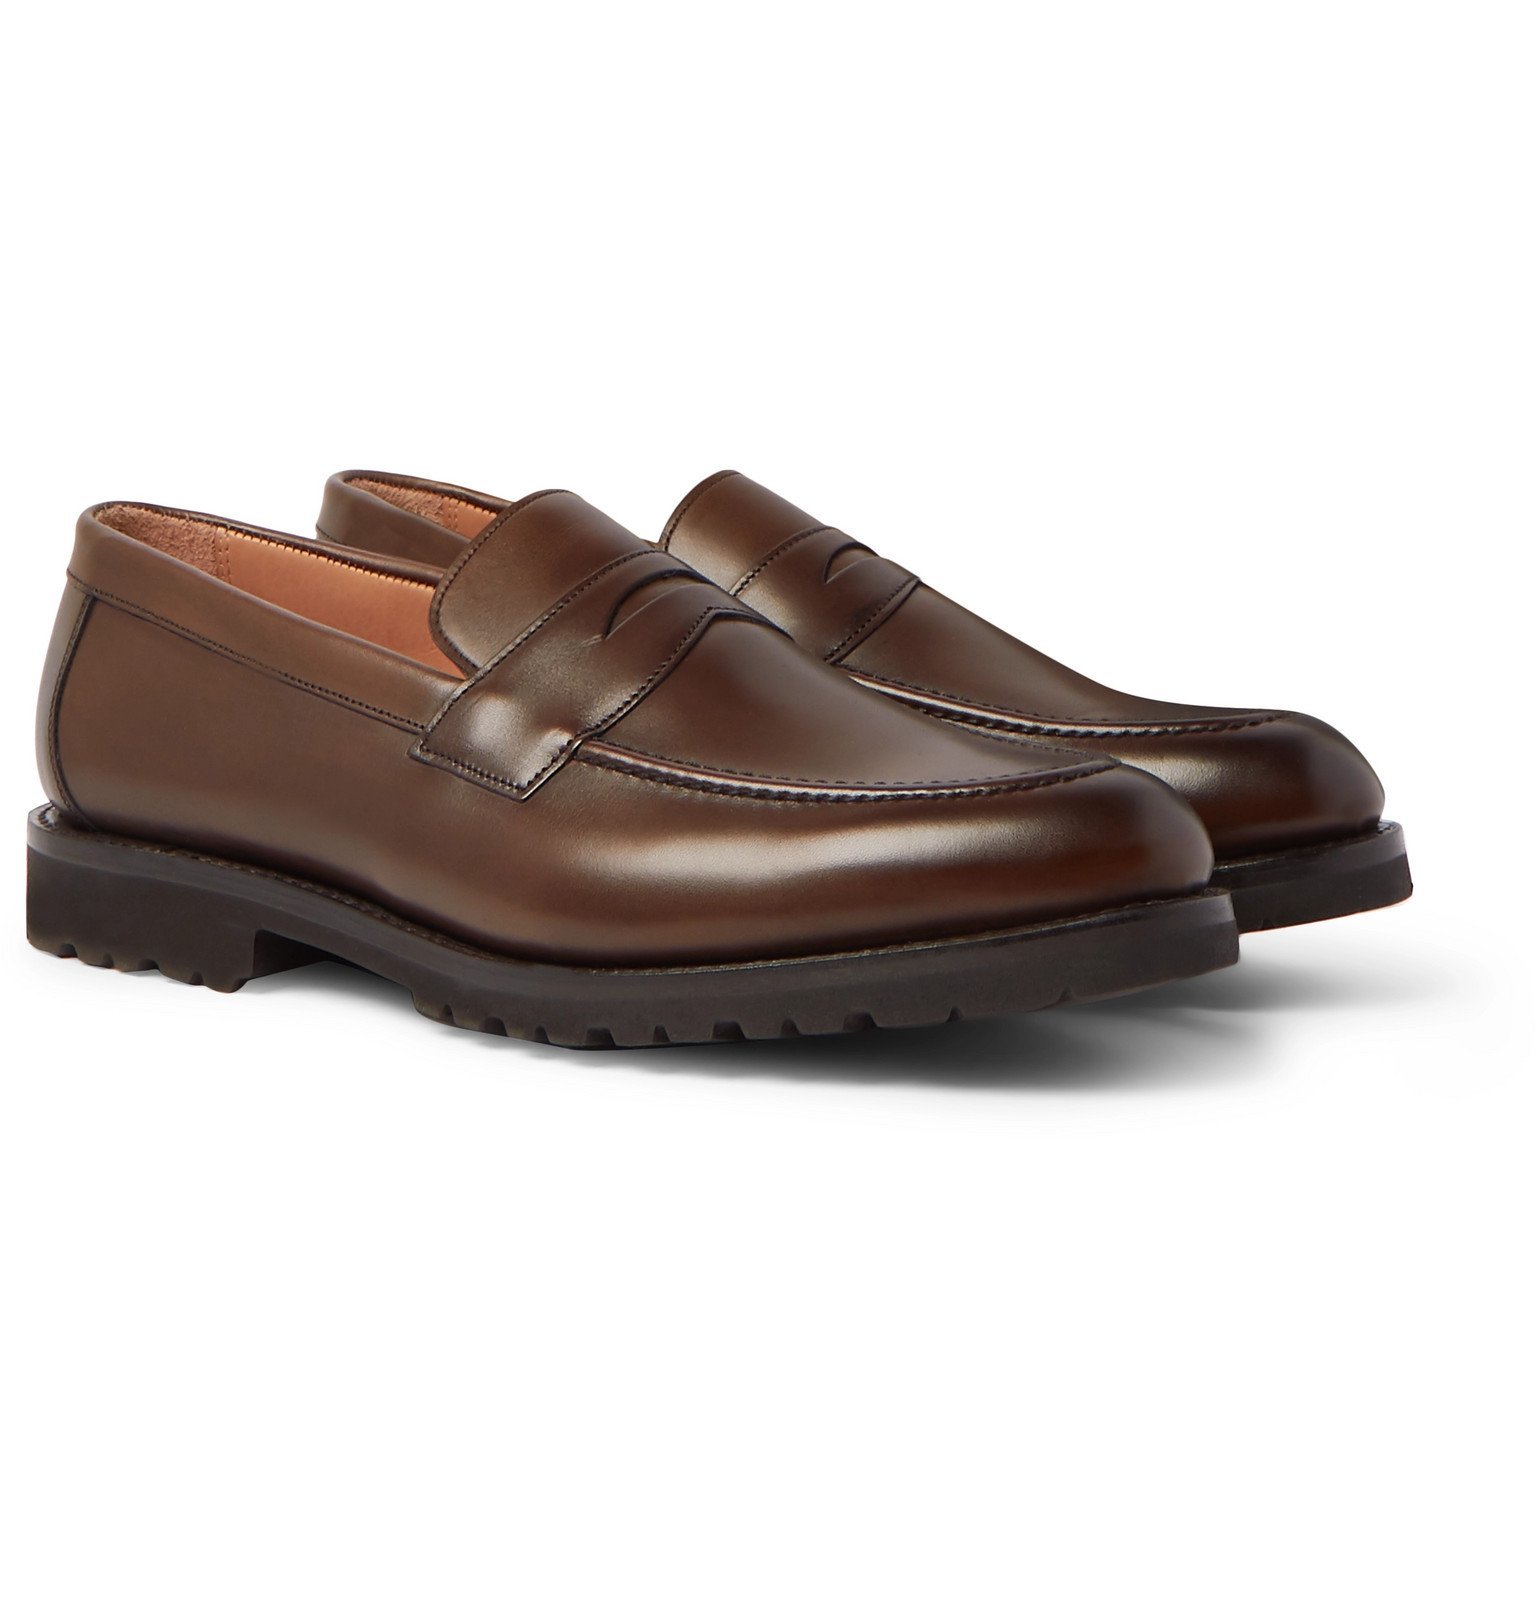 Cheaney - Hadley Burnished-Leather Penny Loafers - Brown Cheaney